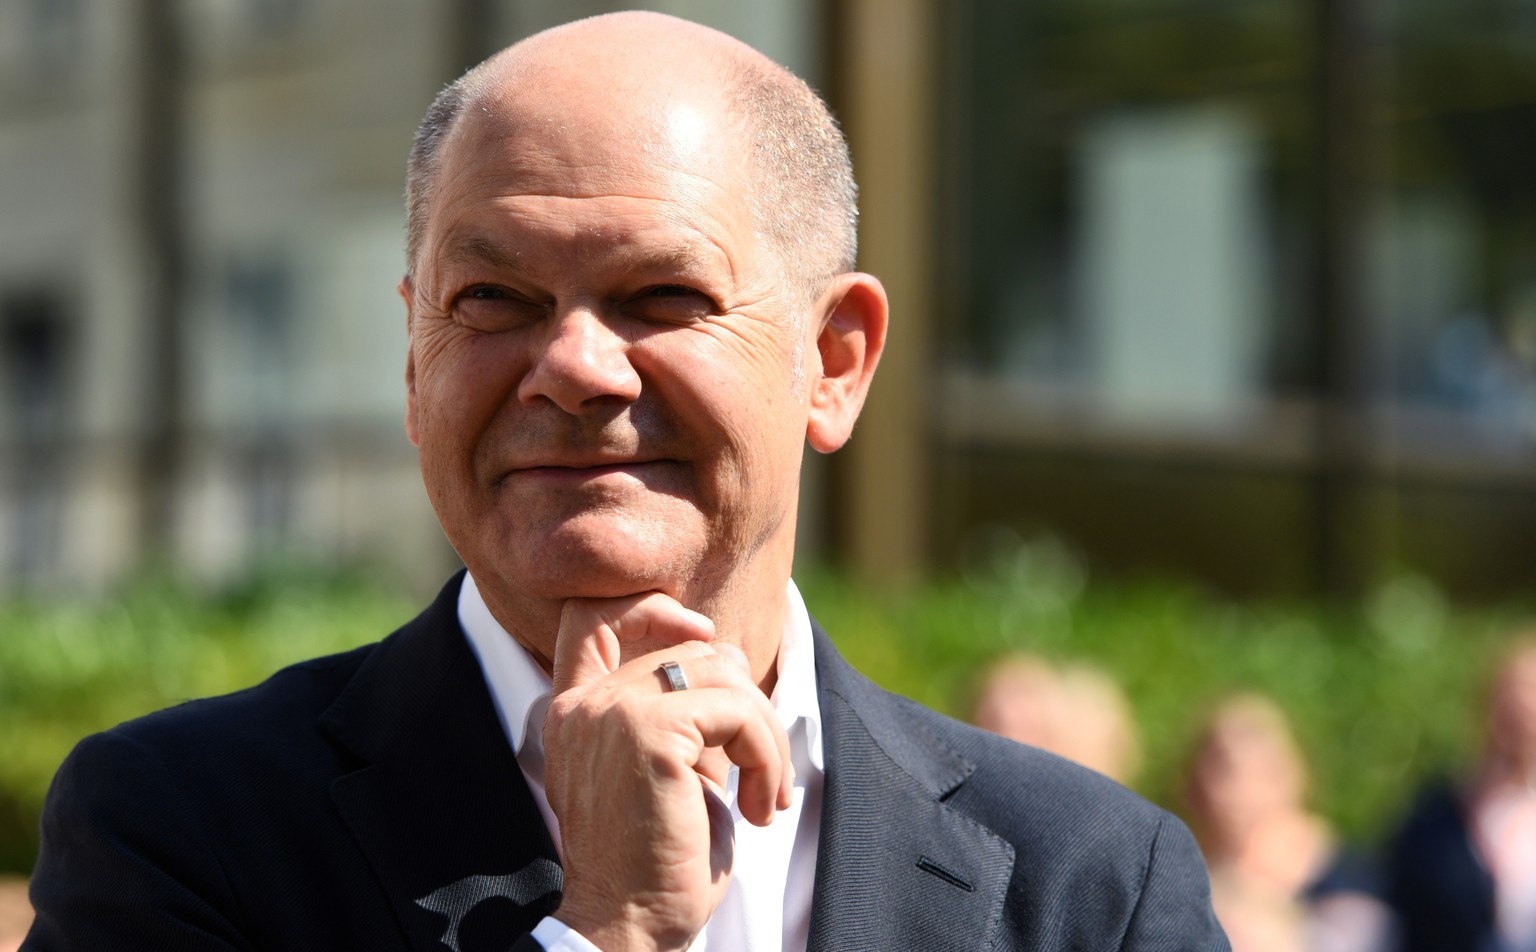 German Vice Chancellor and Finance Minister Olaf Scholz gestures during the &quot;Open Door Day&quot; of the Federal Ministry of Finance in Berlin, Germany, August 17, 2019. REUTERS/Annegret Hilse